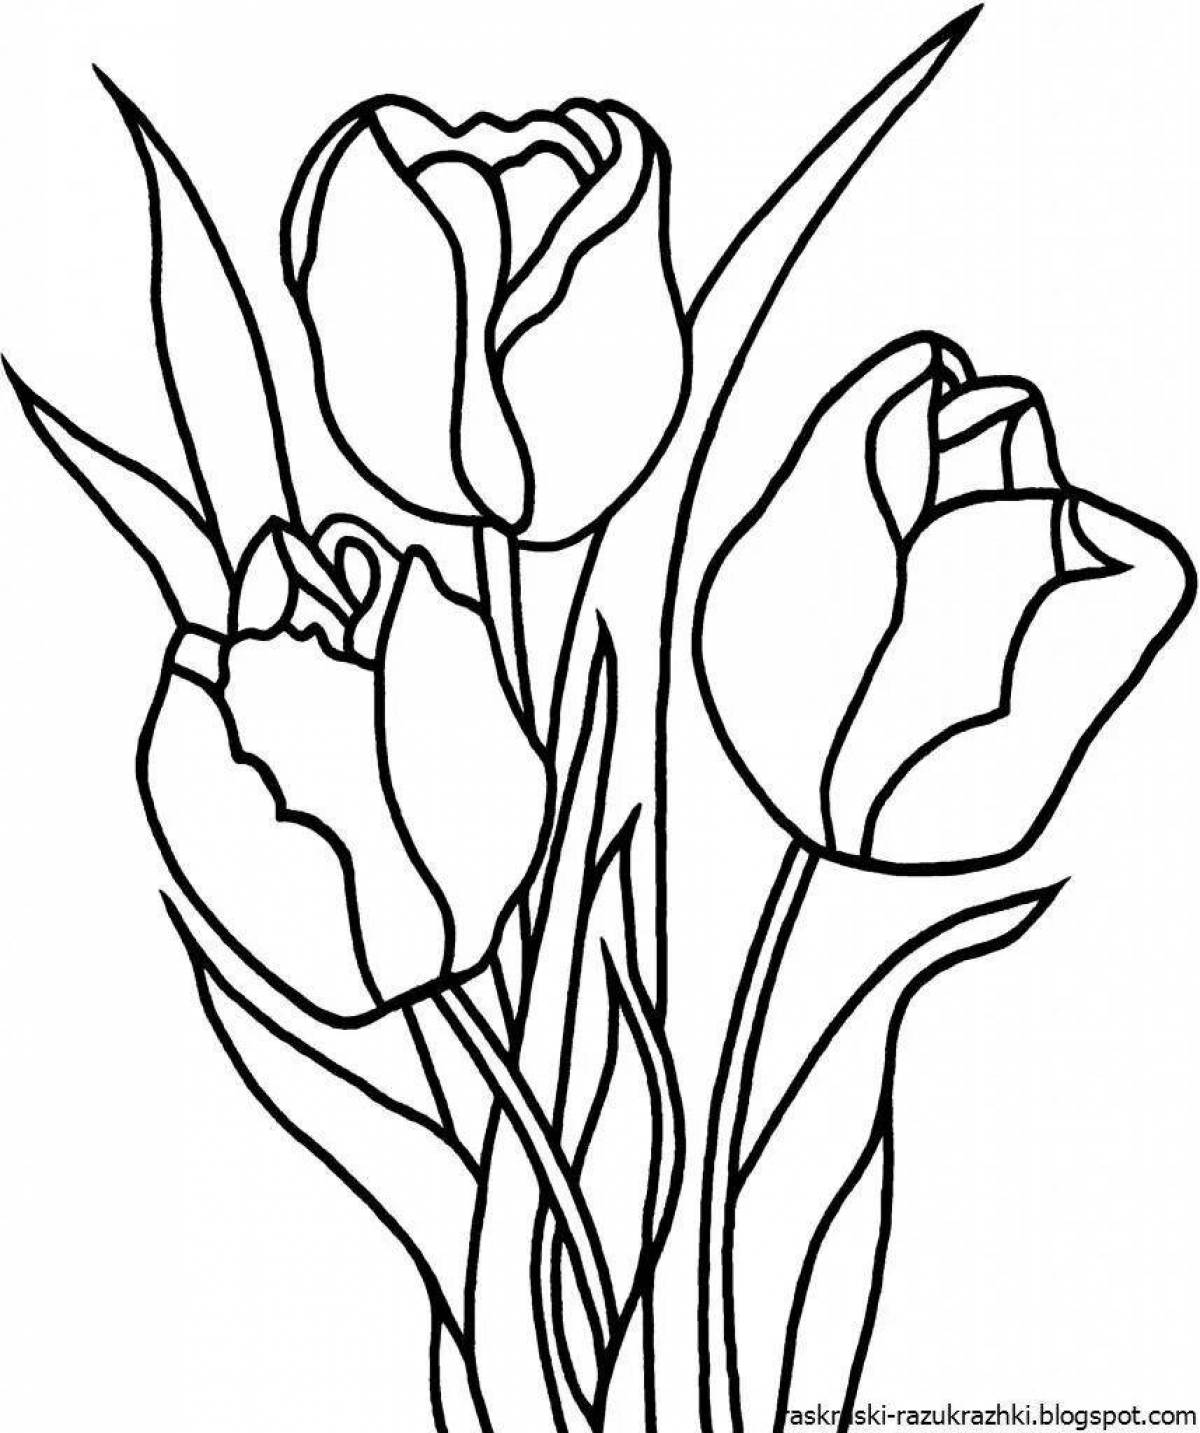 Amazing tulips coloring book for kids